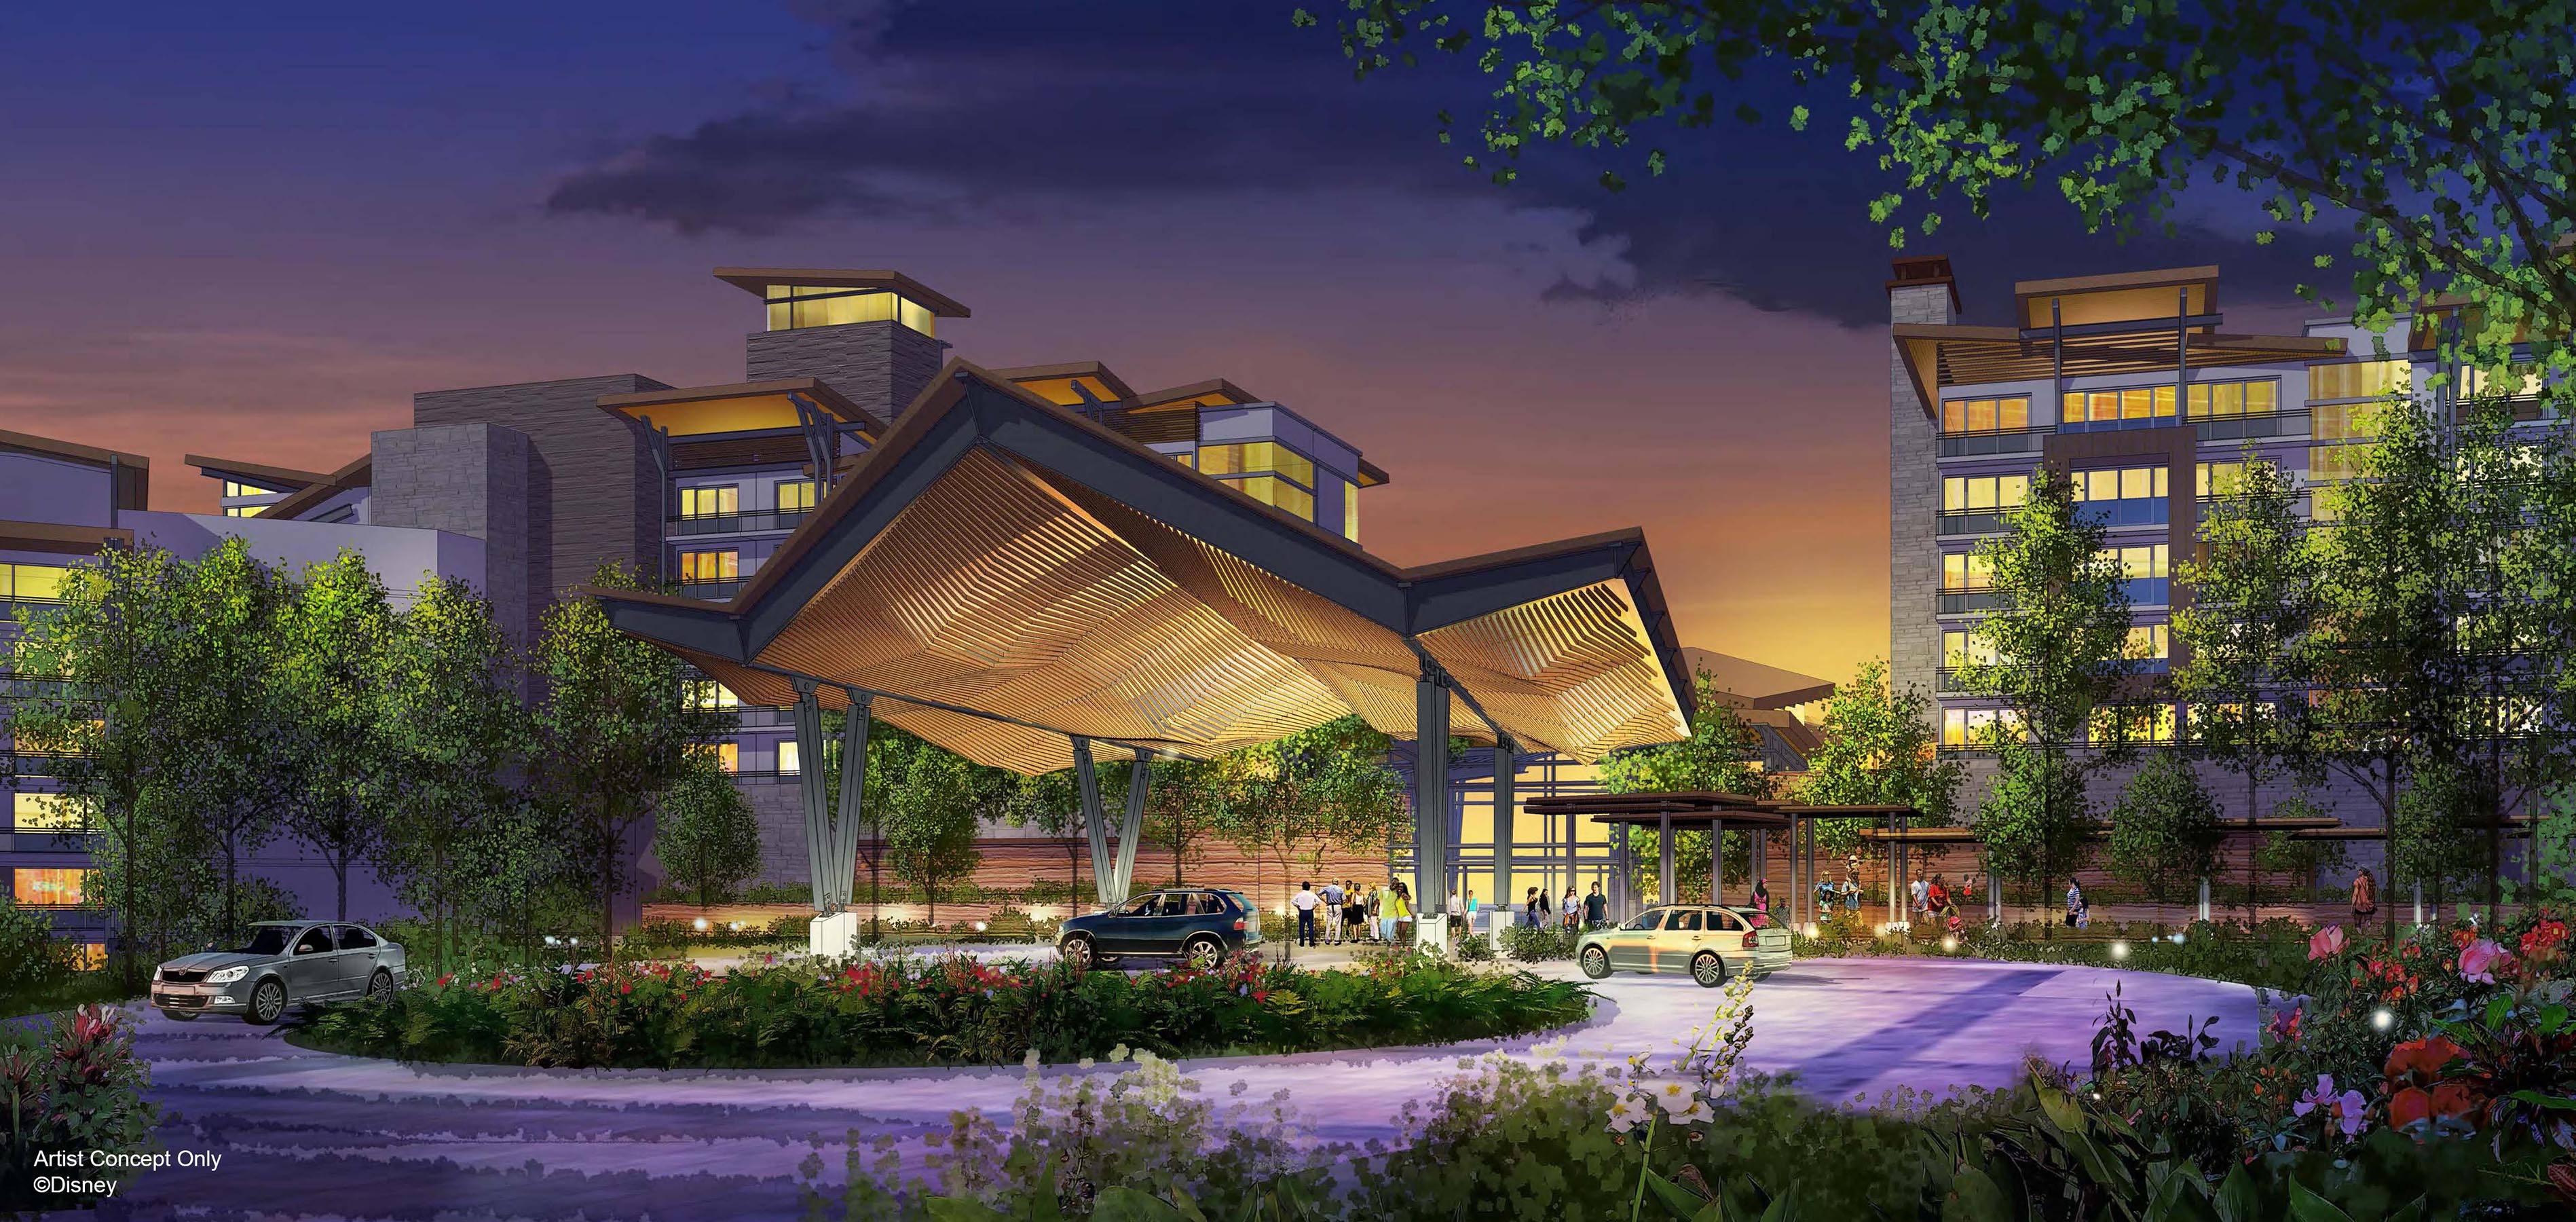 The next planned DVC resort Reflections was swiftly cancelled as COVID-19 hit